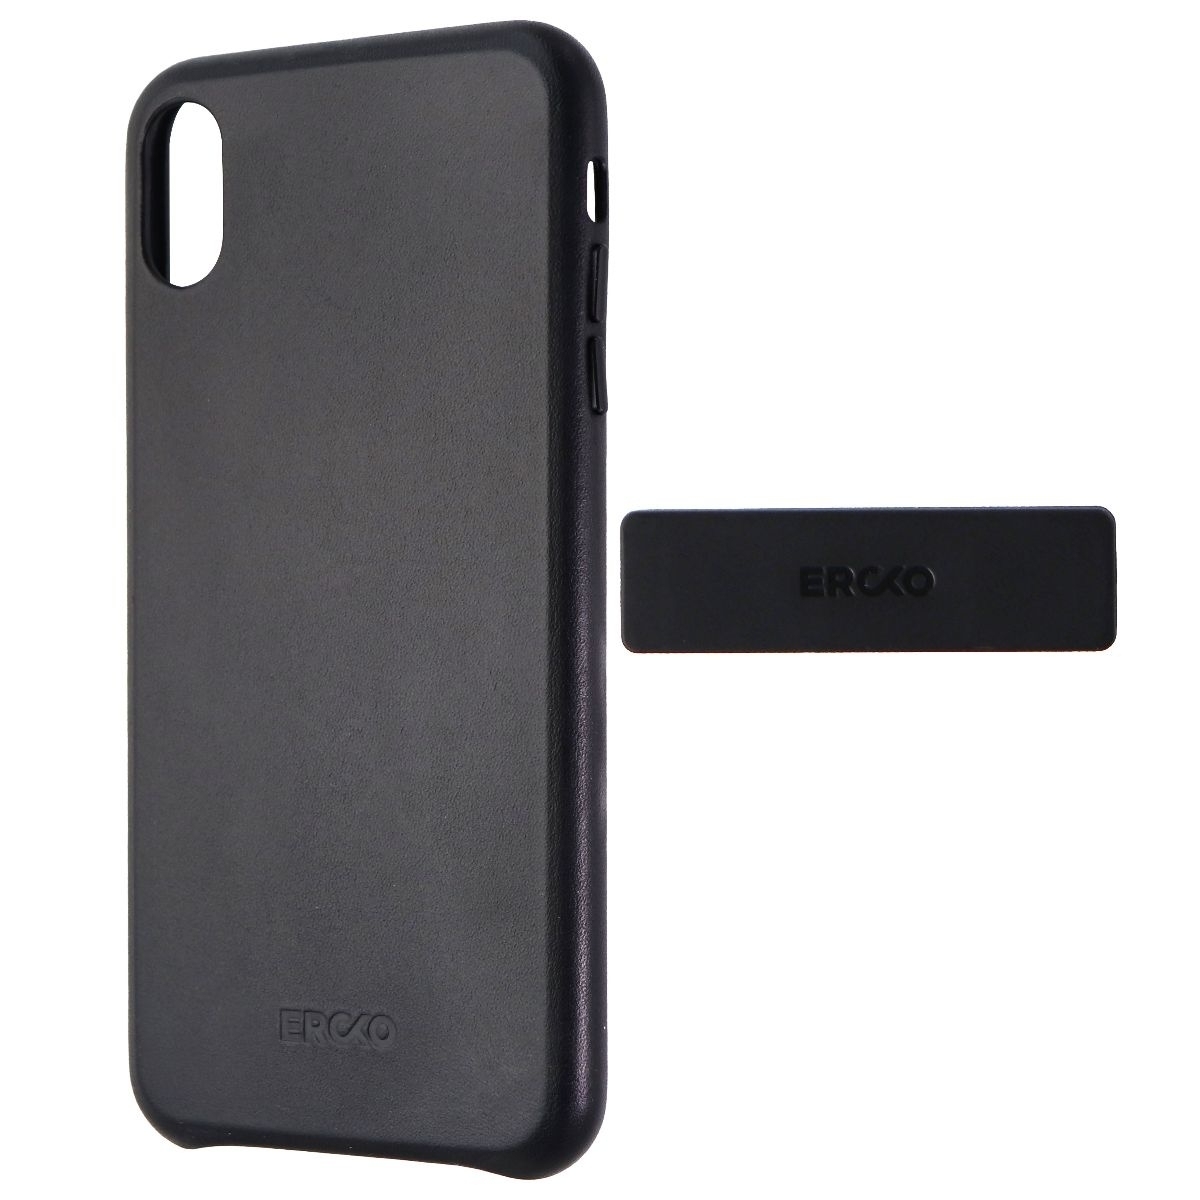 Ercko Leather Hard Case & Small Magnet Holder For IPhone Xs Max - Black